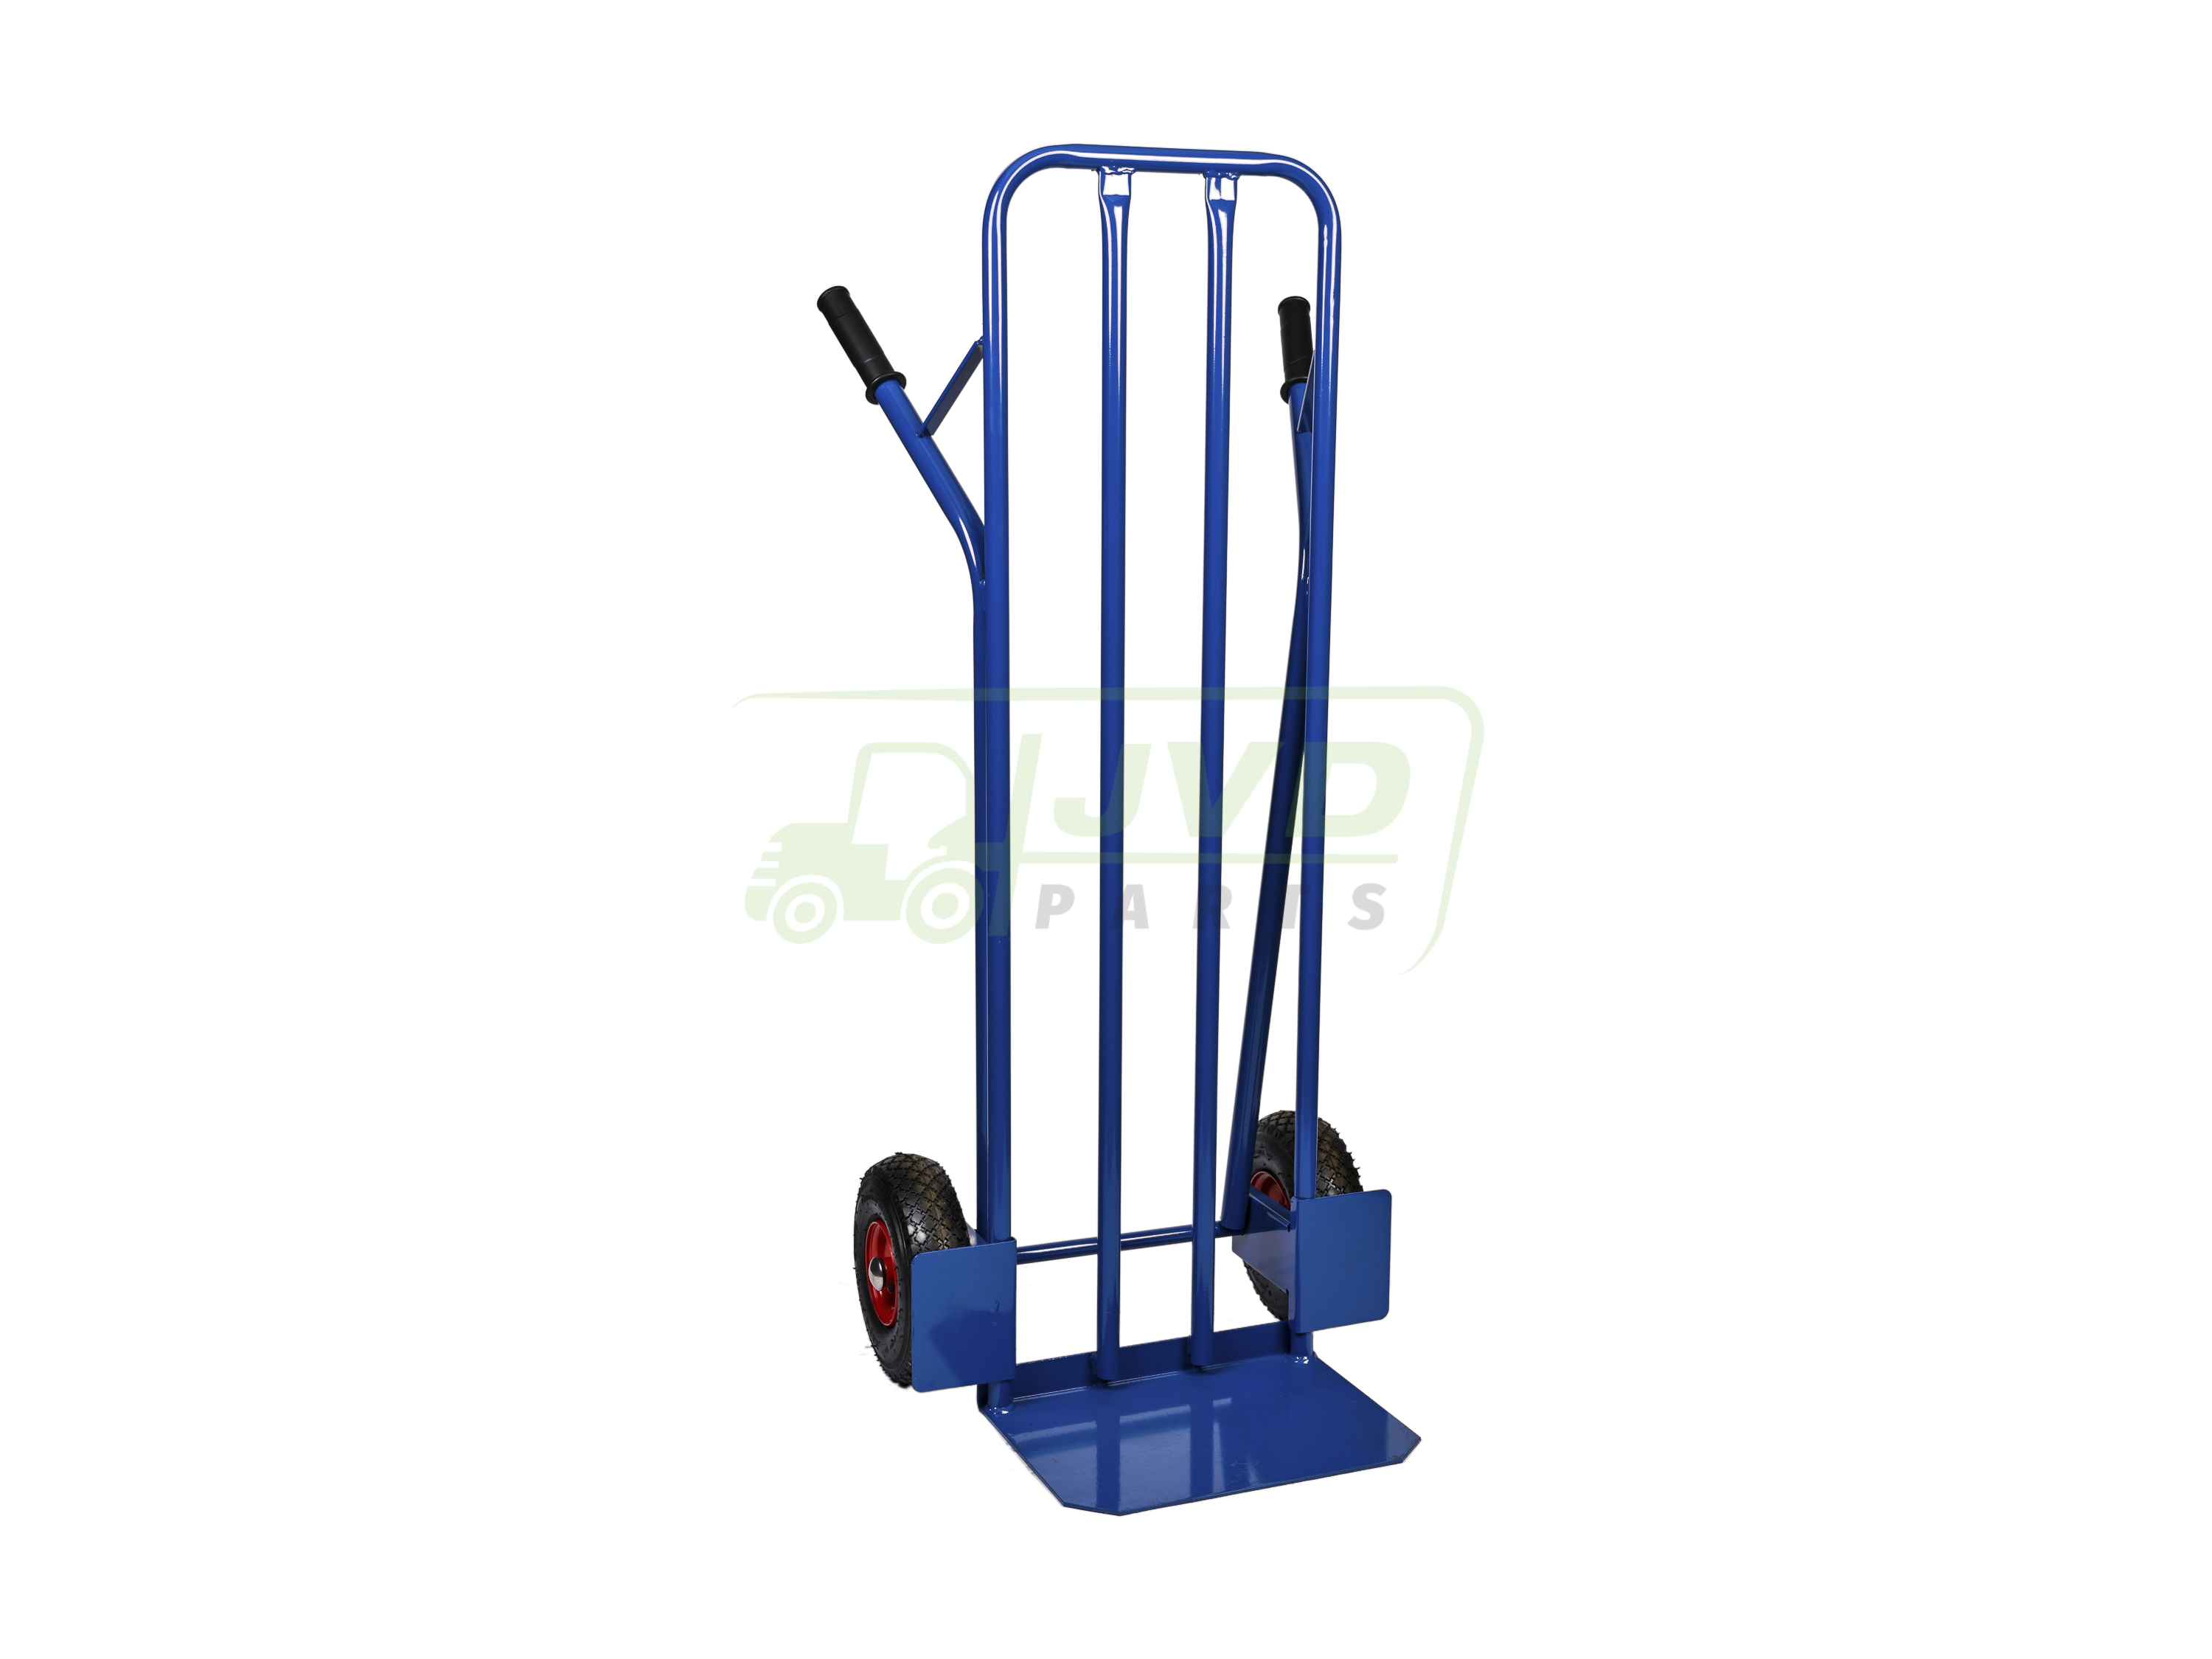 Handtrolley, Height 1300mm - Plate (400x300mm)